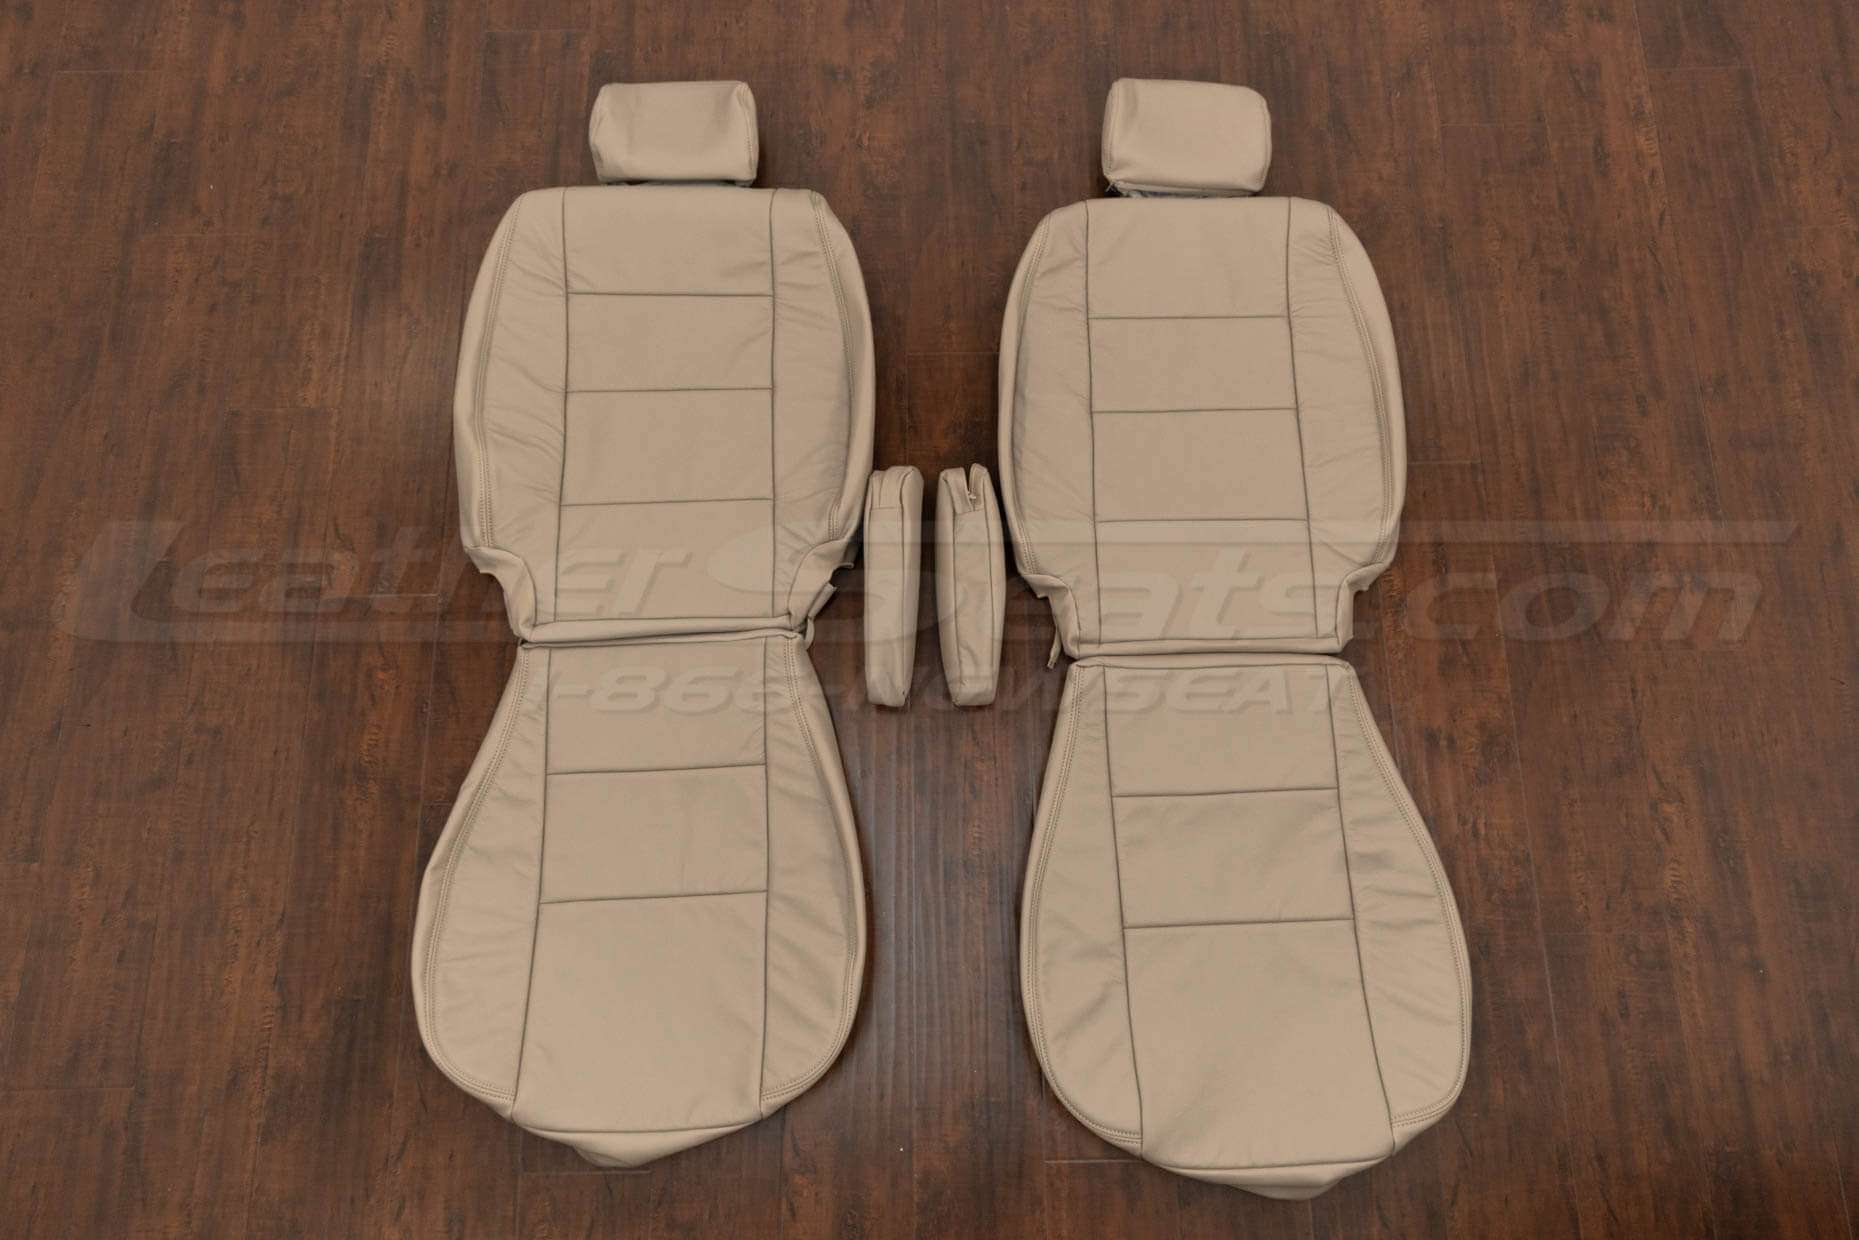 Toyota Sequoia Leather Kit - Adobe - Front Row upholstery w/ armrest